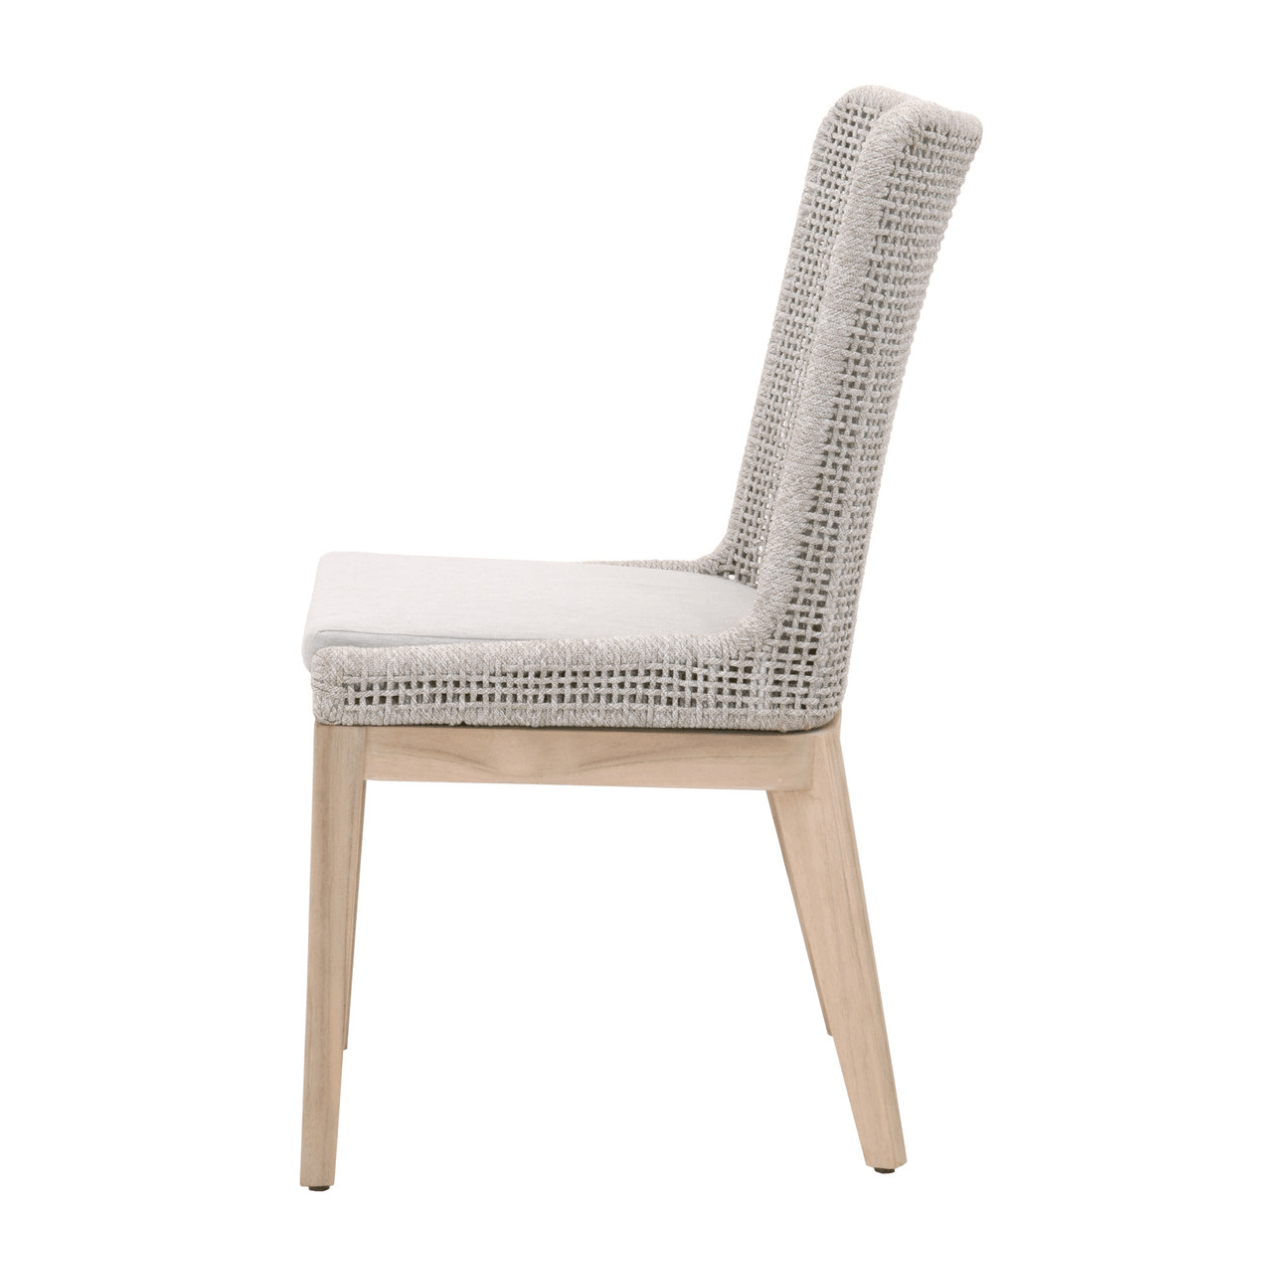 Woven Mesh Outdoor Chairs | Set of 2